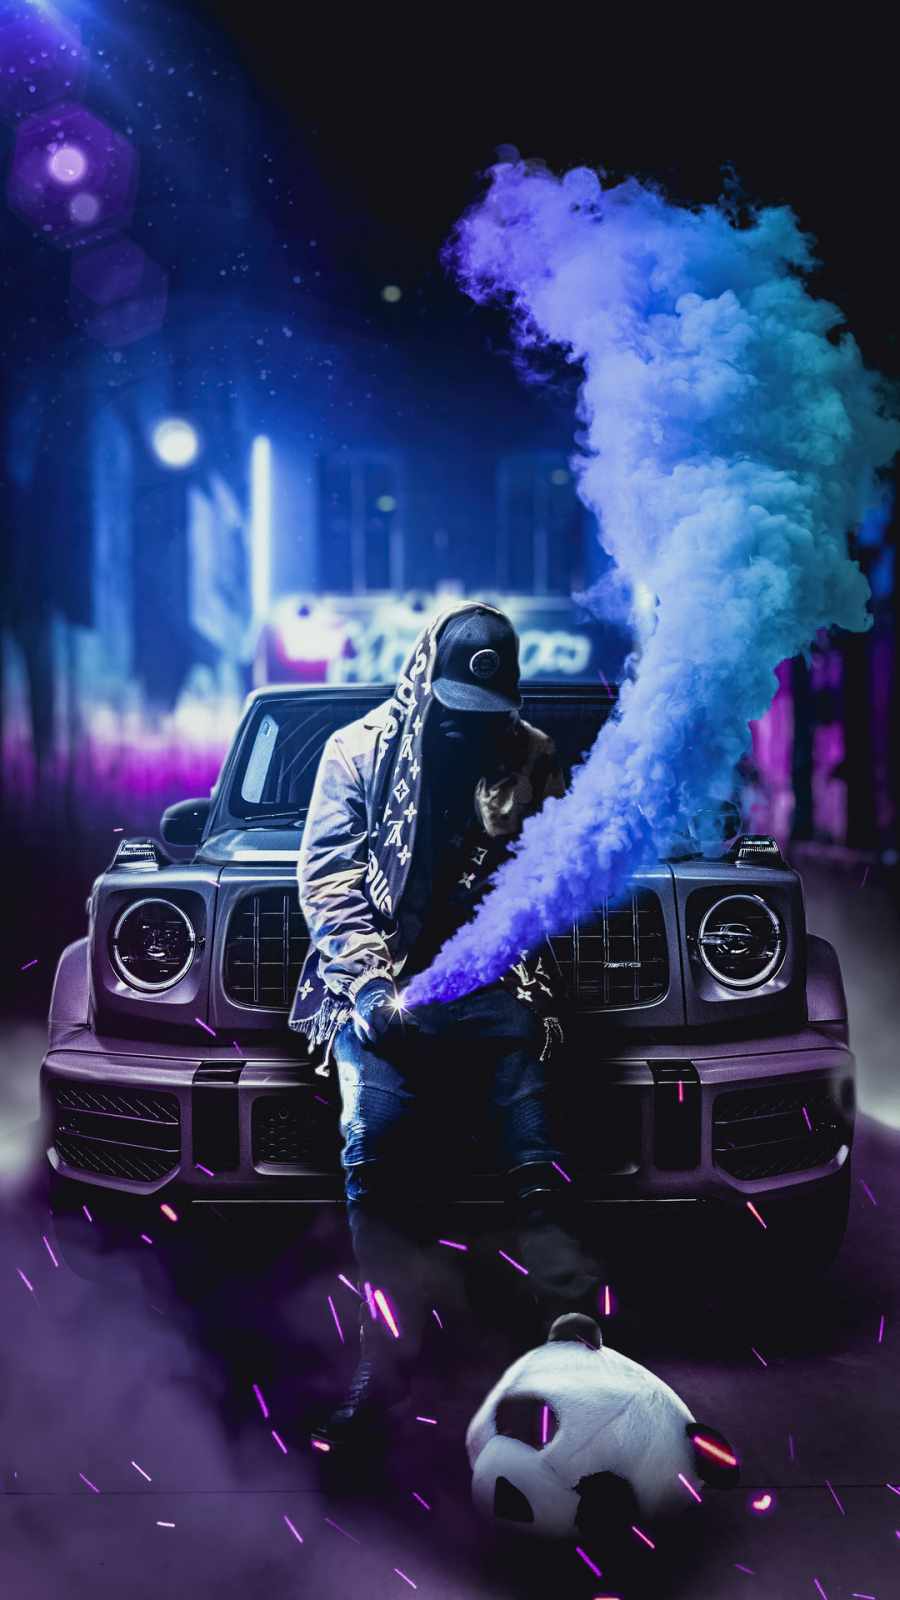 G Wagon And Smoke IPhone Wallpaper HD  IPhone Wallpapers